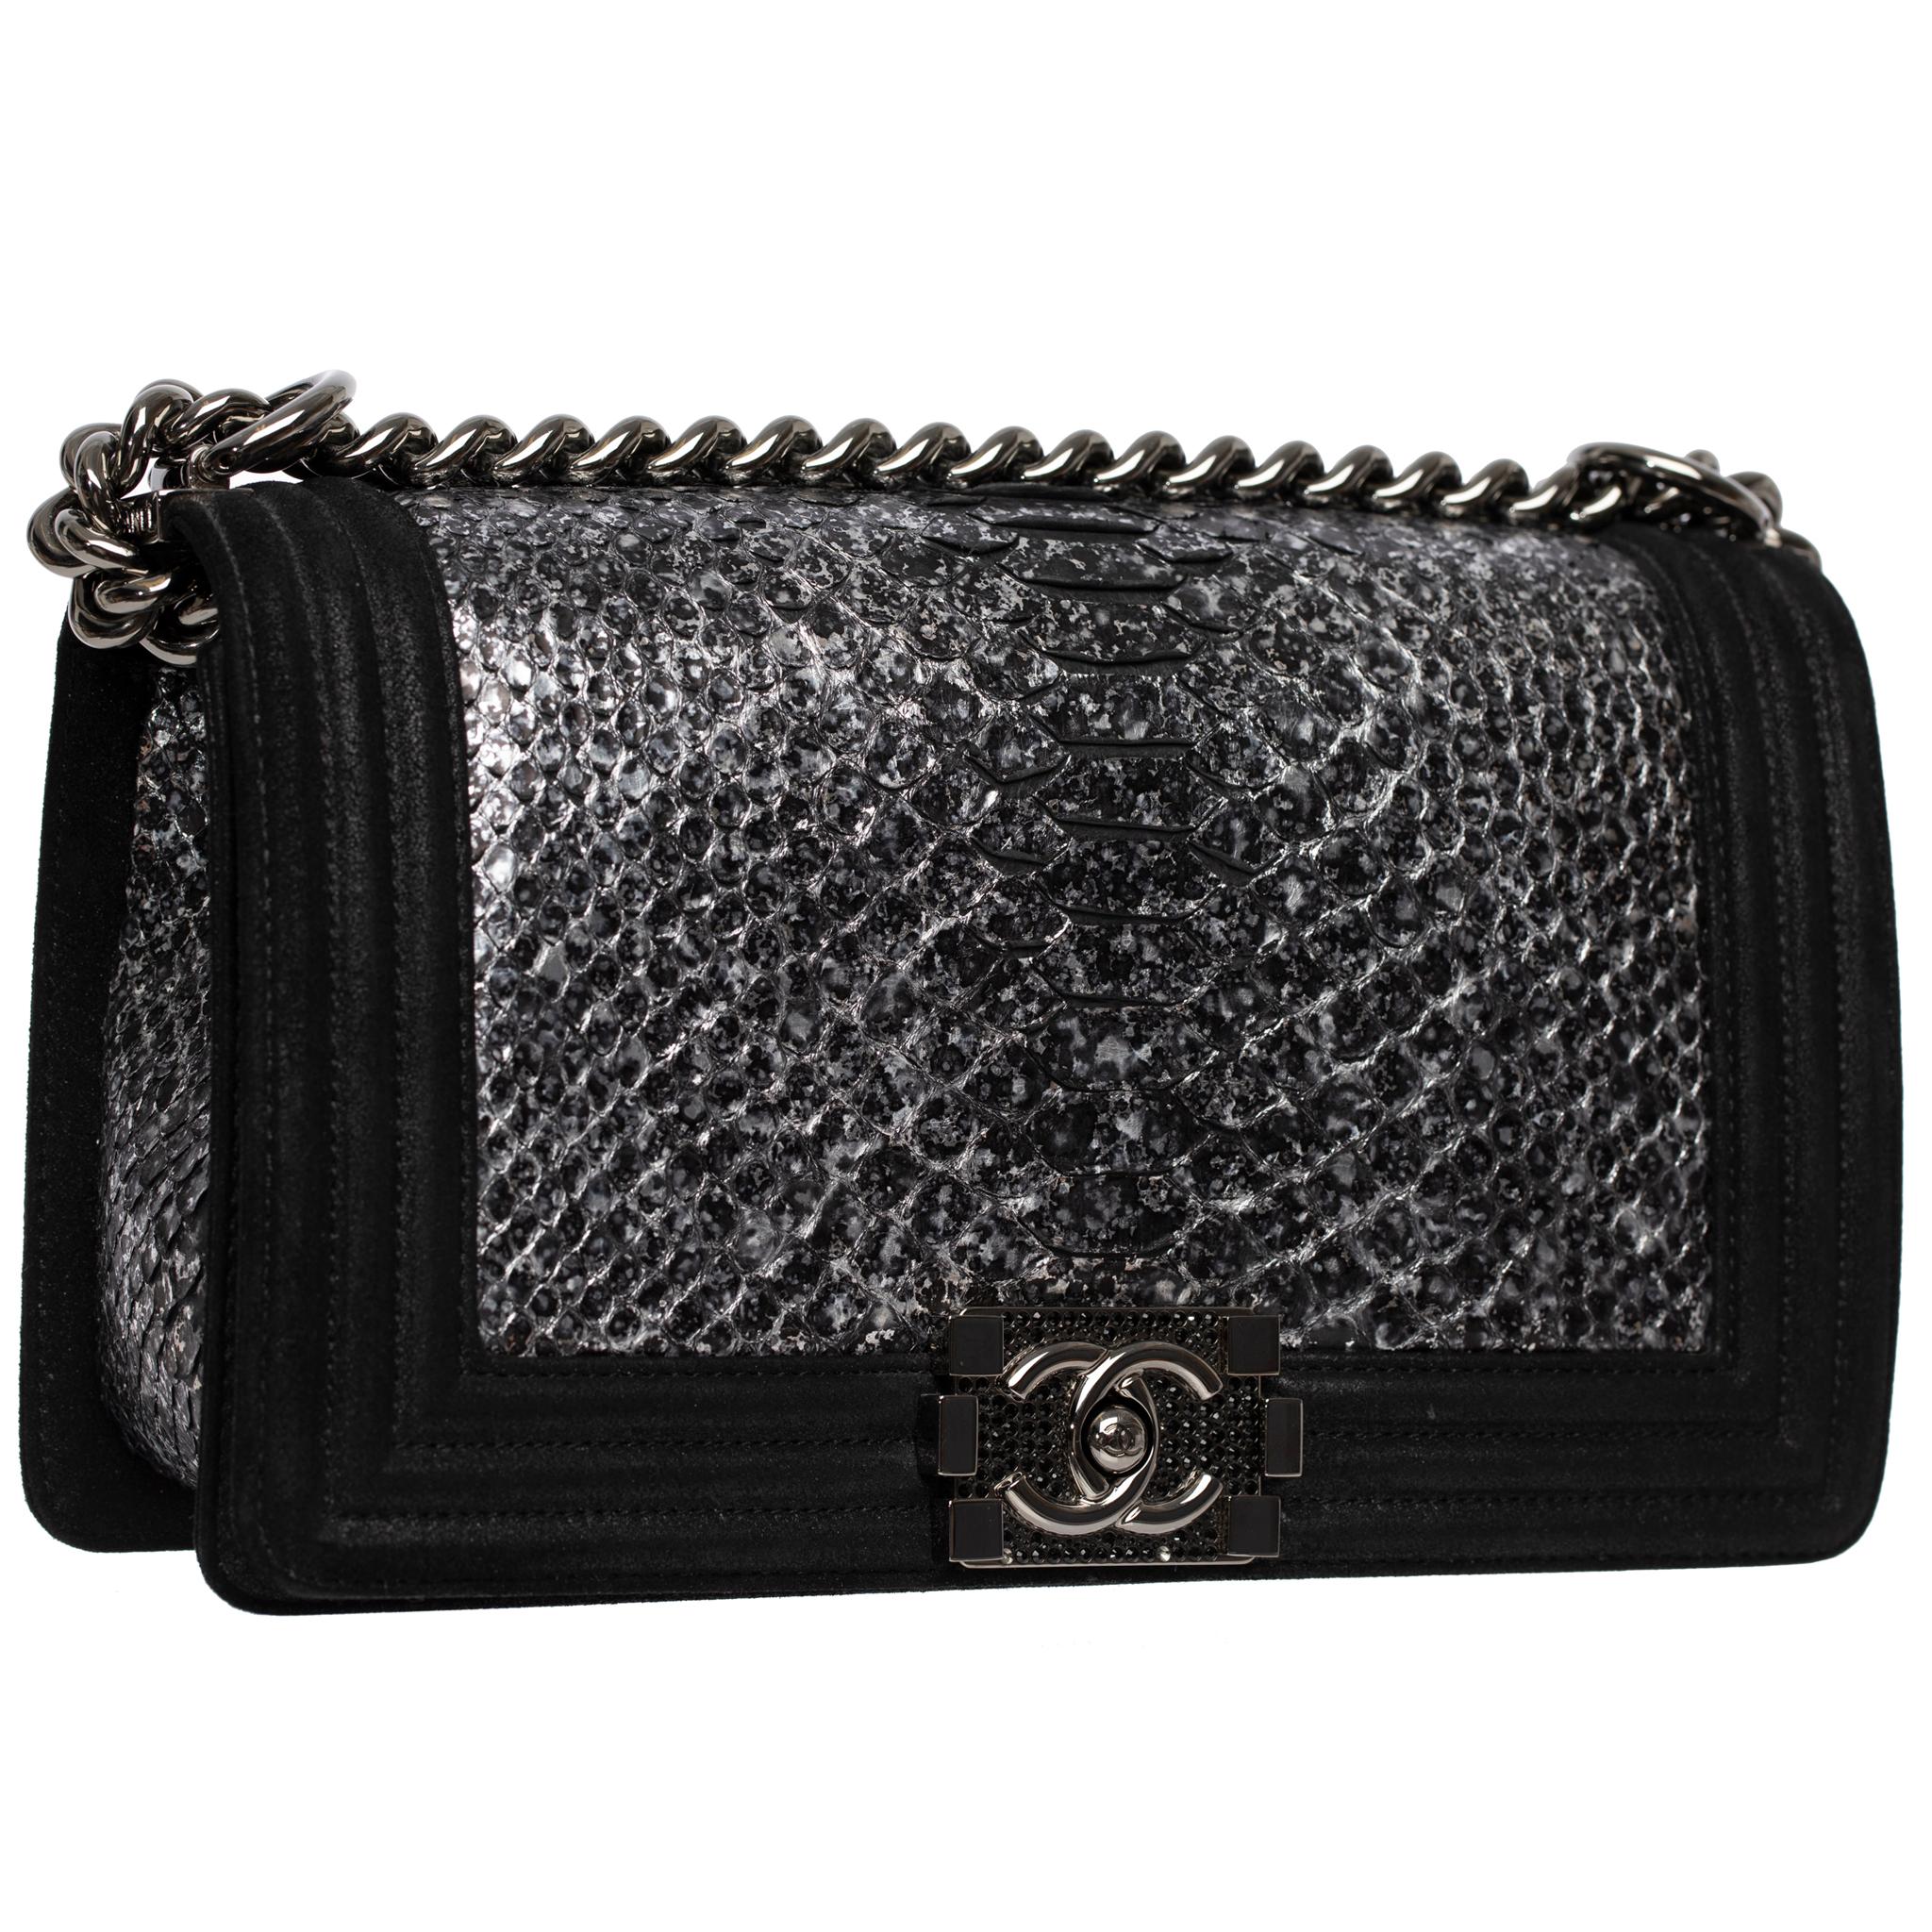 This Chanel Medium Le Boy bag exemplifies exceptional craftsmanship with its metallic python leather exterior and black goatskin leather trim. The Ruthenium hardware adds a lovely finishing touch to this classic collector's item, dating back to